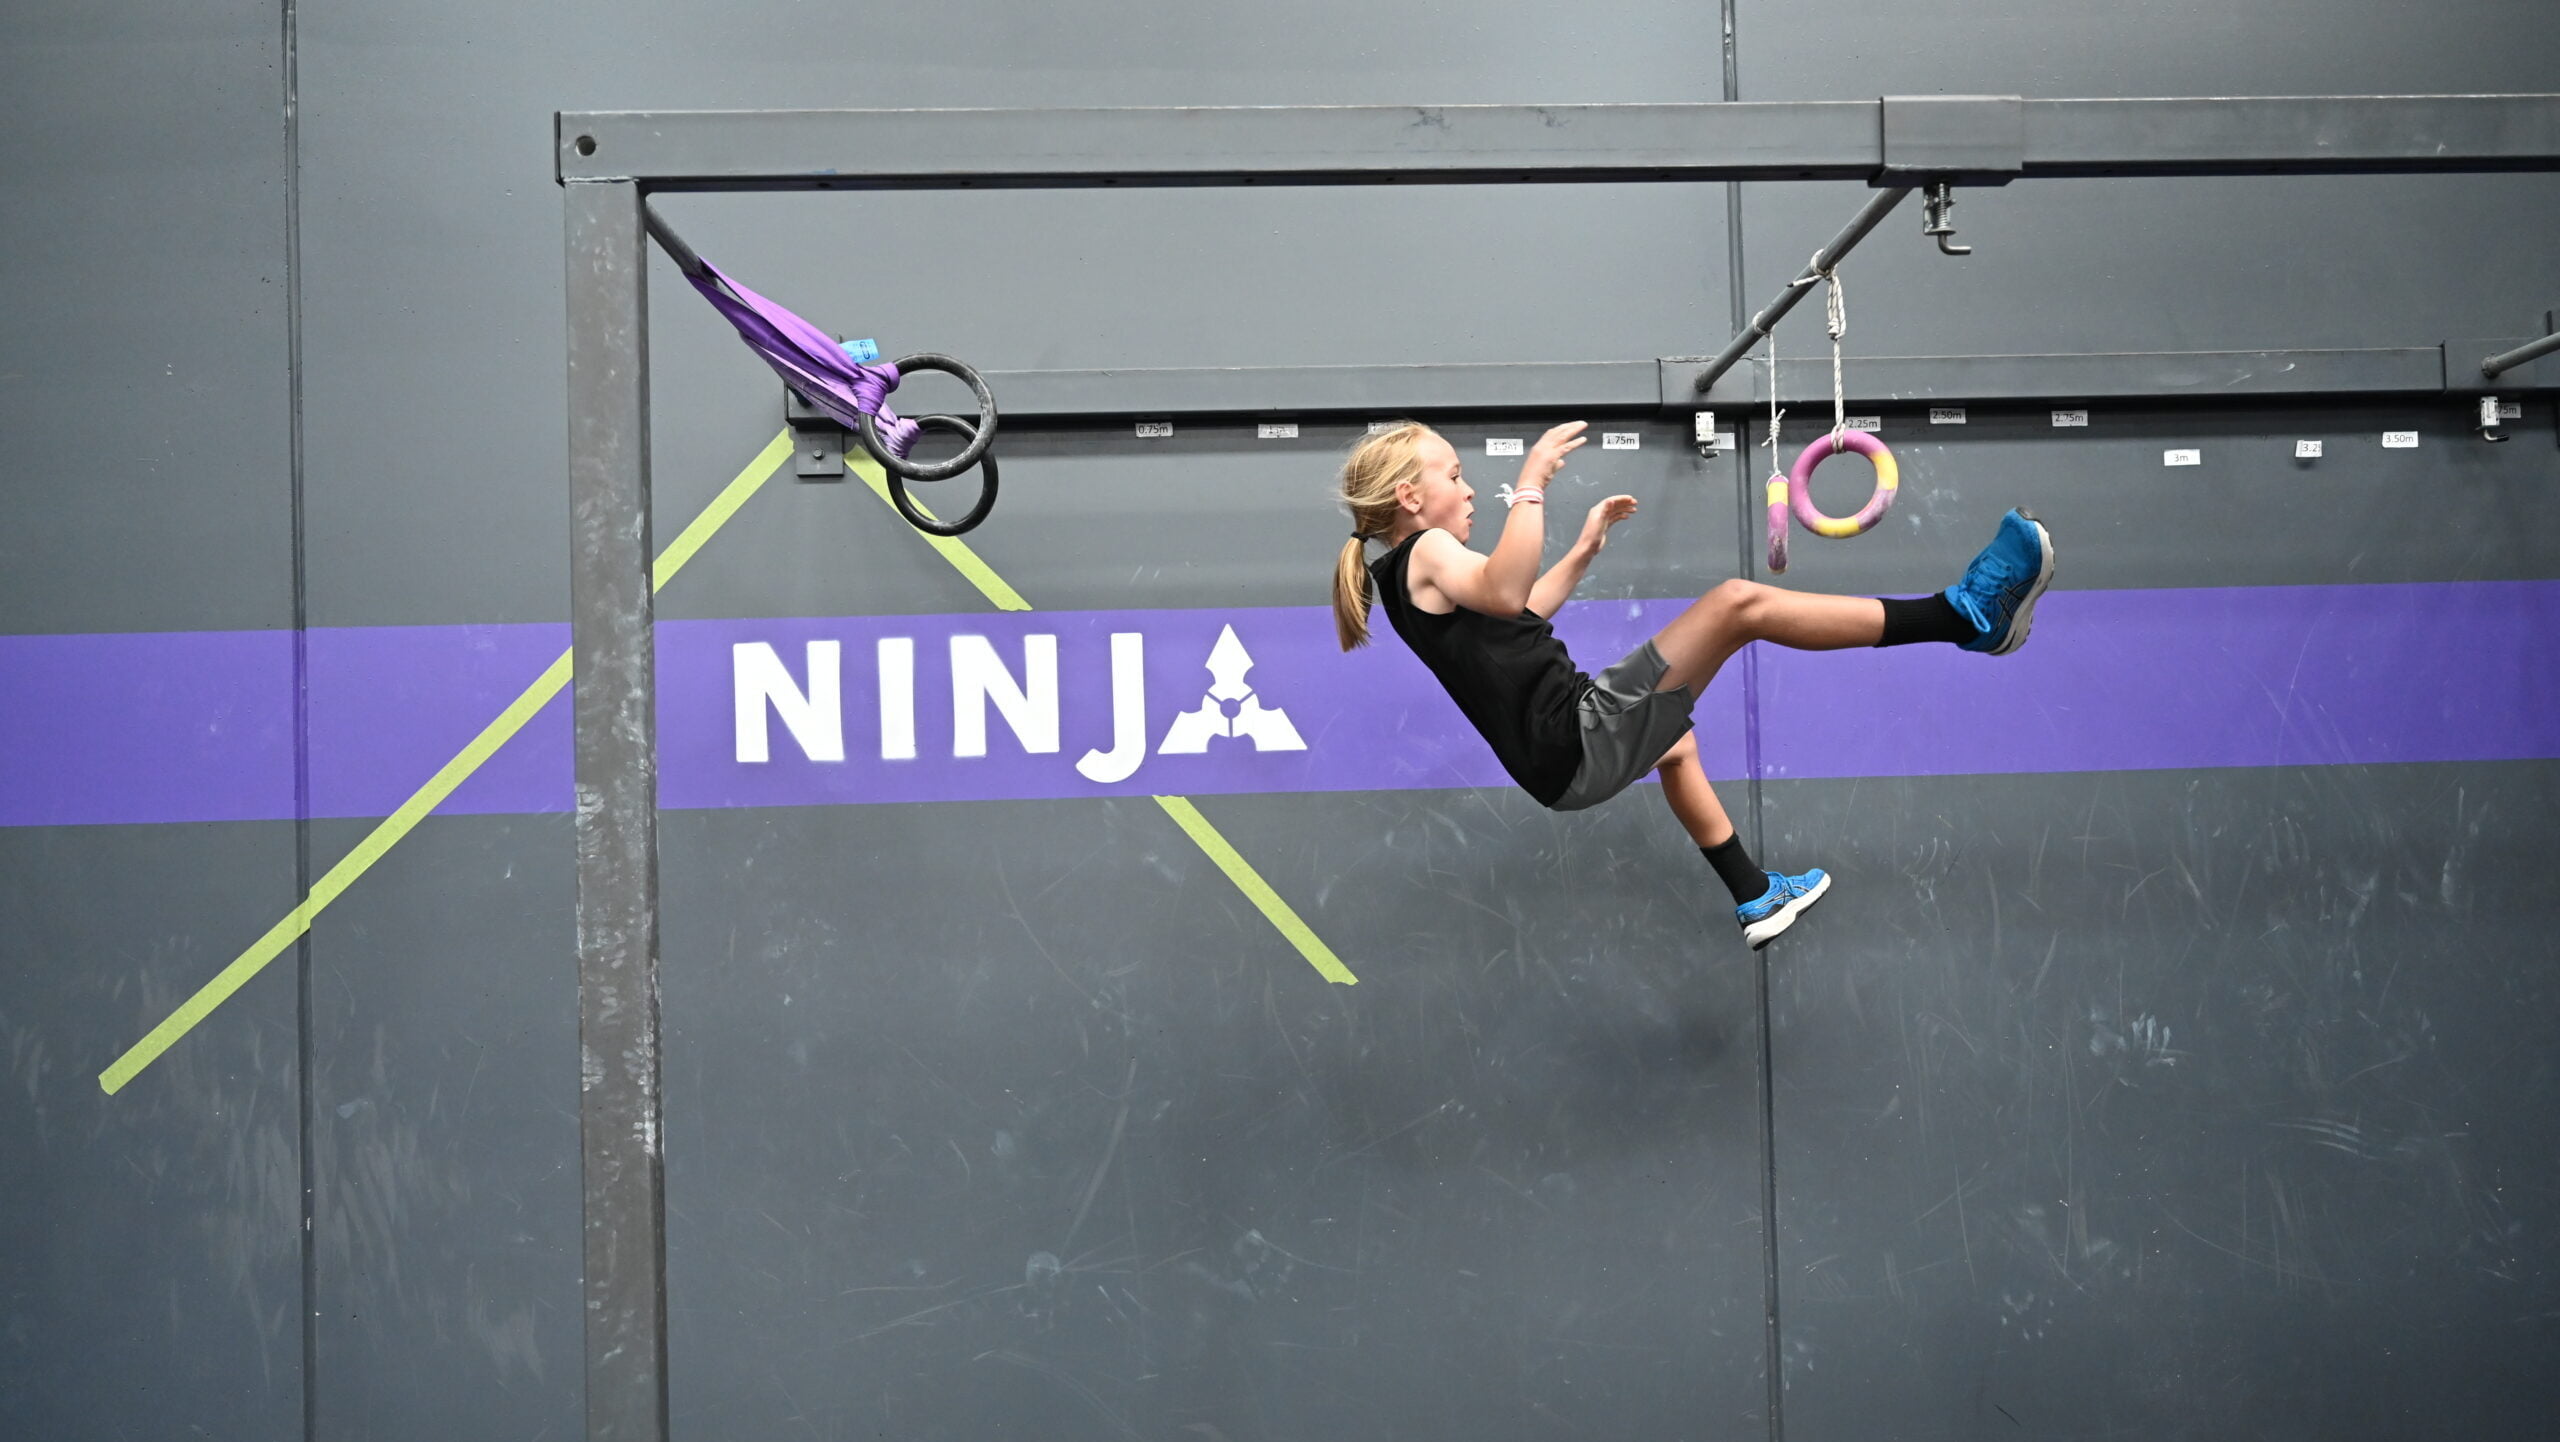 Events DSC 2451 scaled e1701239617627 at a Ninja Warrior gym in Melbourne, Australia.